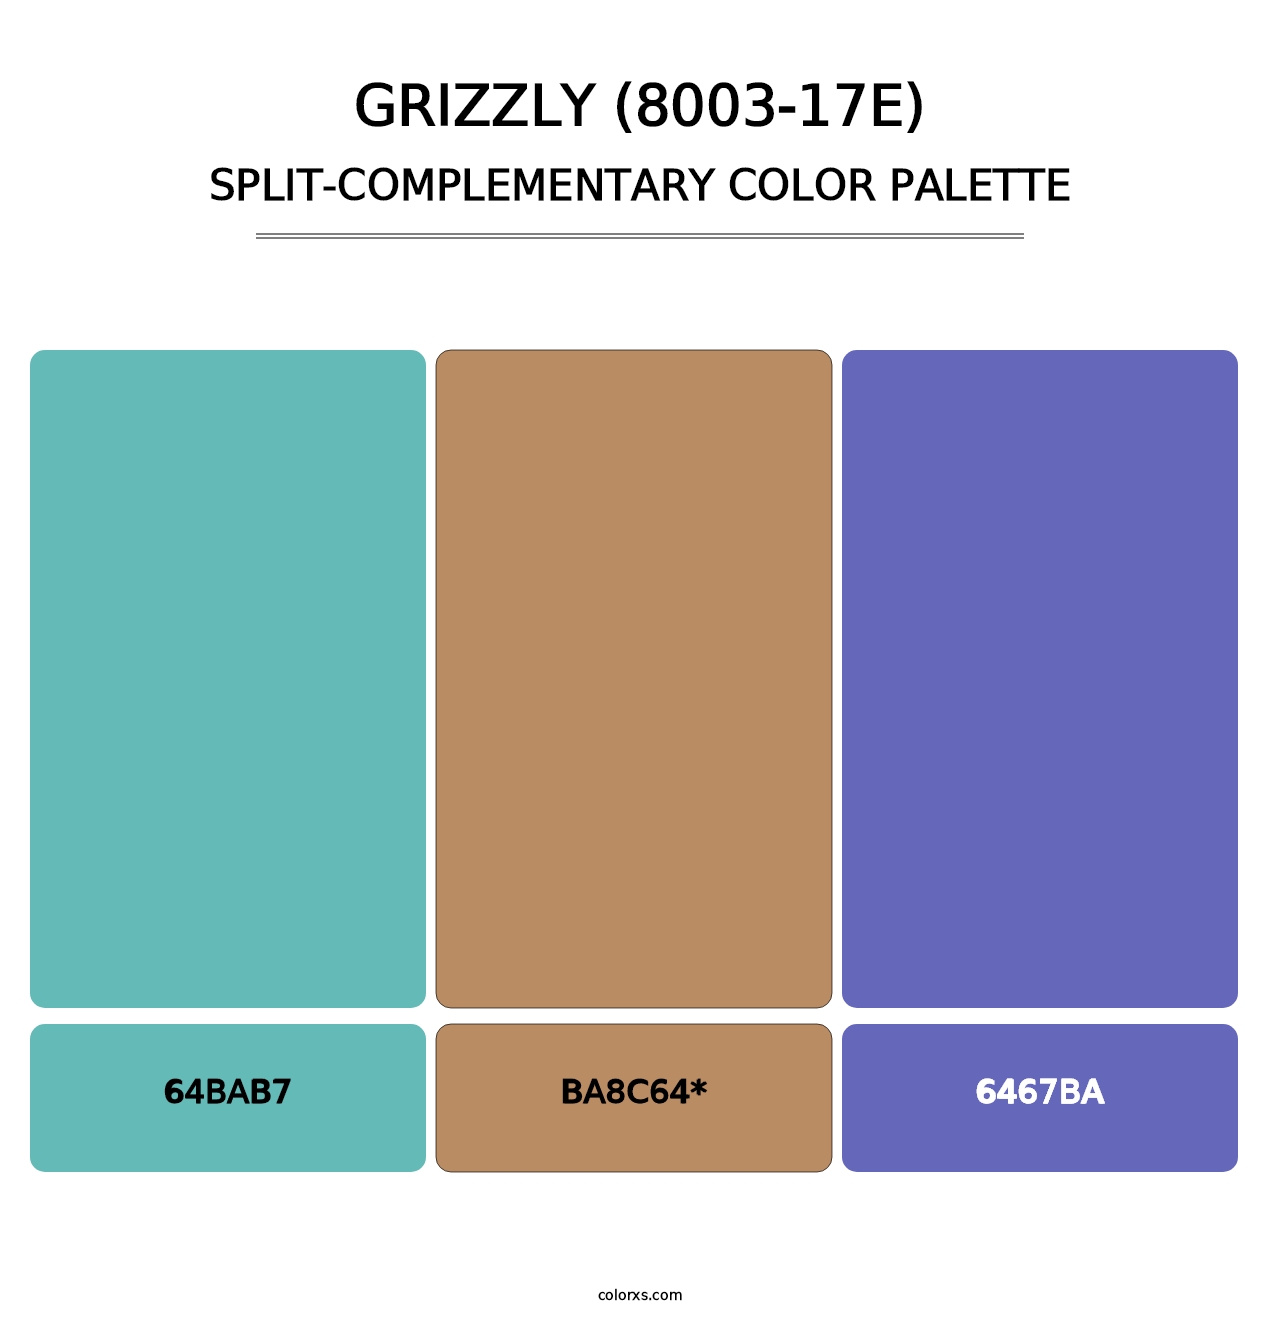 Grizzly (8003-17E) - Split-Complementary Color Palette